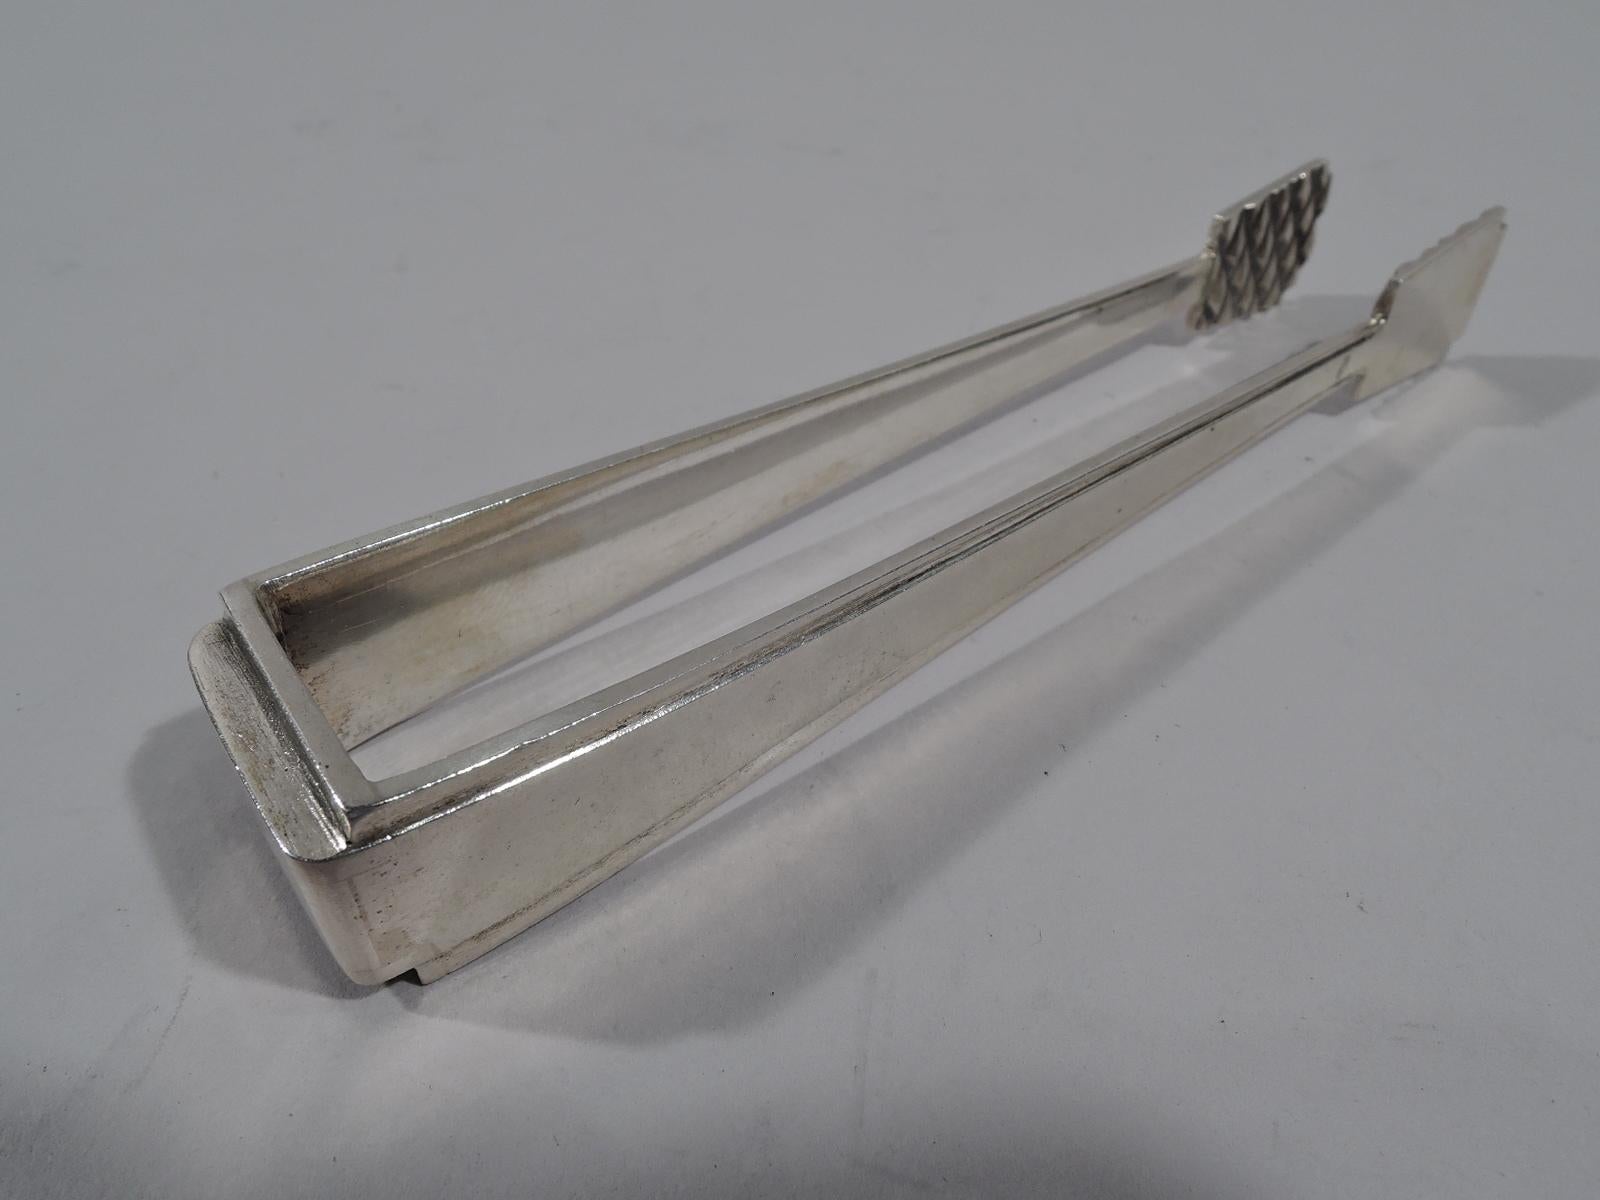 Unusual Antique Russian 875 silver sugar tongs. Stepped and rectilinear frame; jaws trapezoidal with raised diaper interior. Marked. Weight: 2.5 troy ounces.